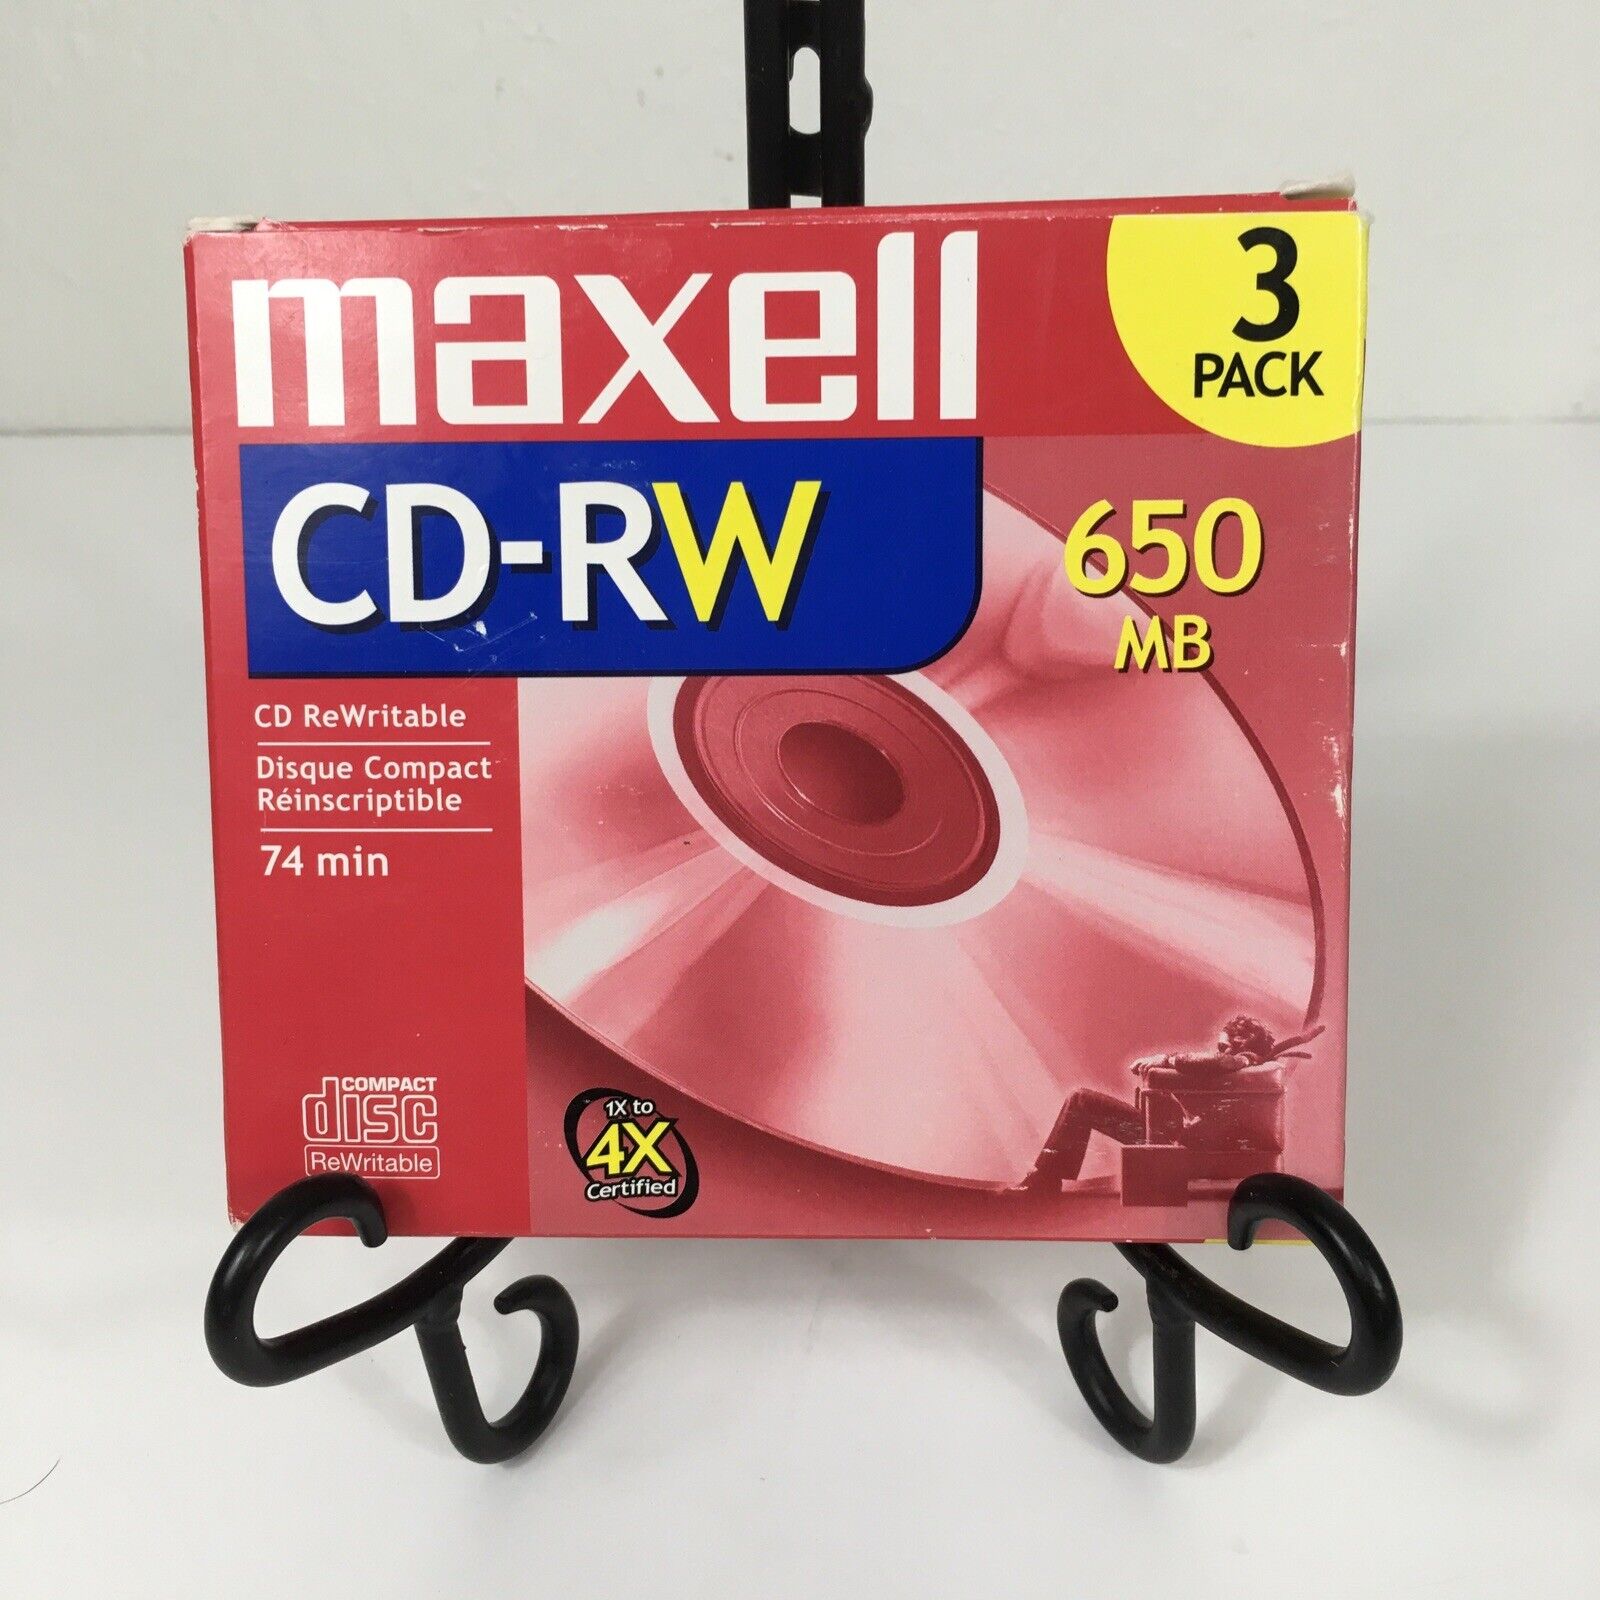 2/3 Maxell CD-RW 650 MB 74min ReWritable Compact Discs CDs #630030 Cases In Box